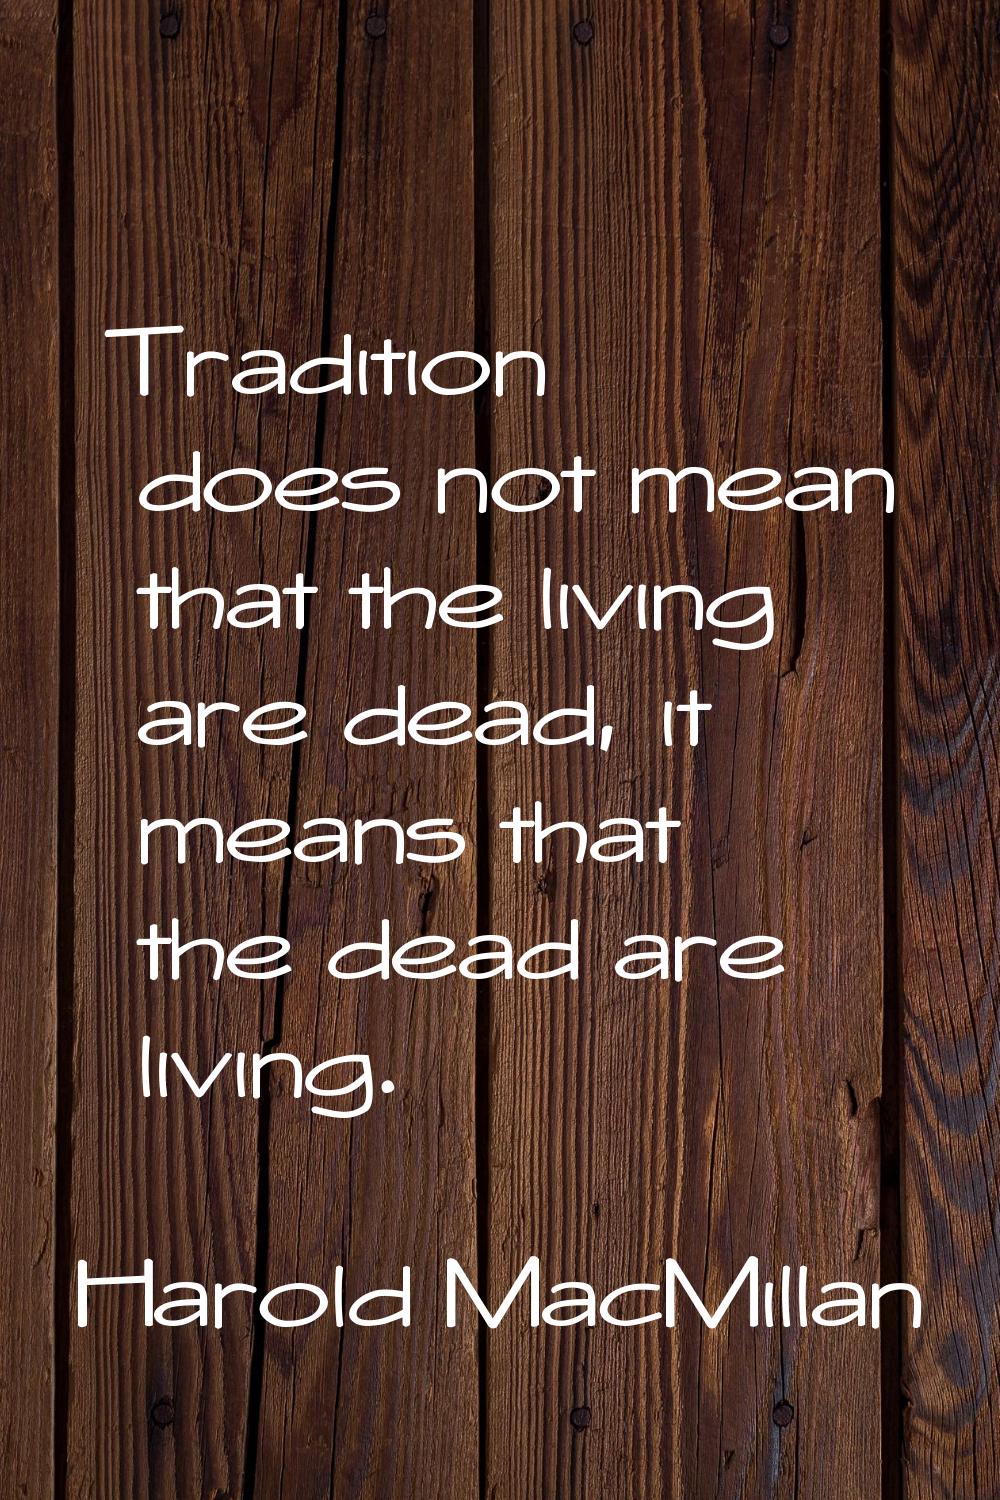 Tradition does not mean that the living are dead, it means that the dead are living.